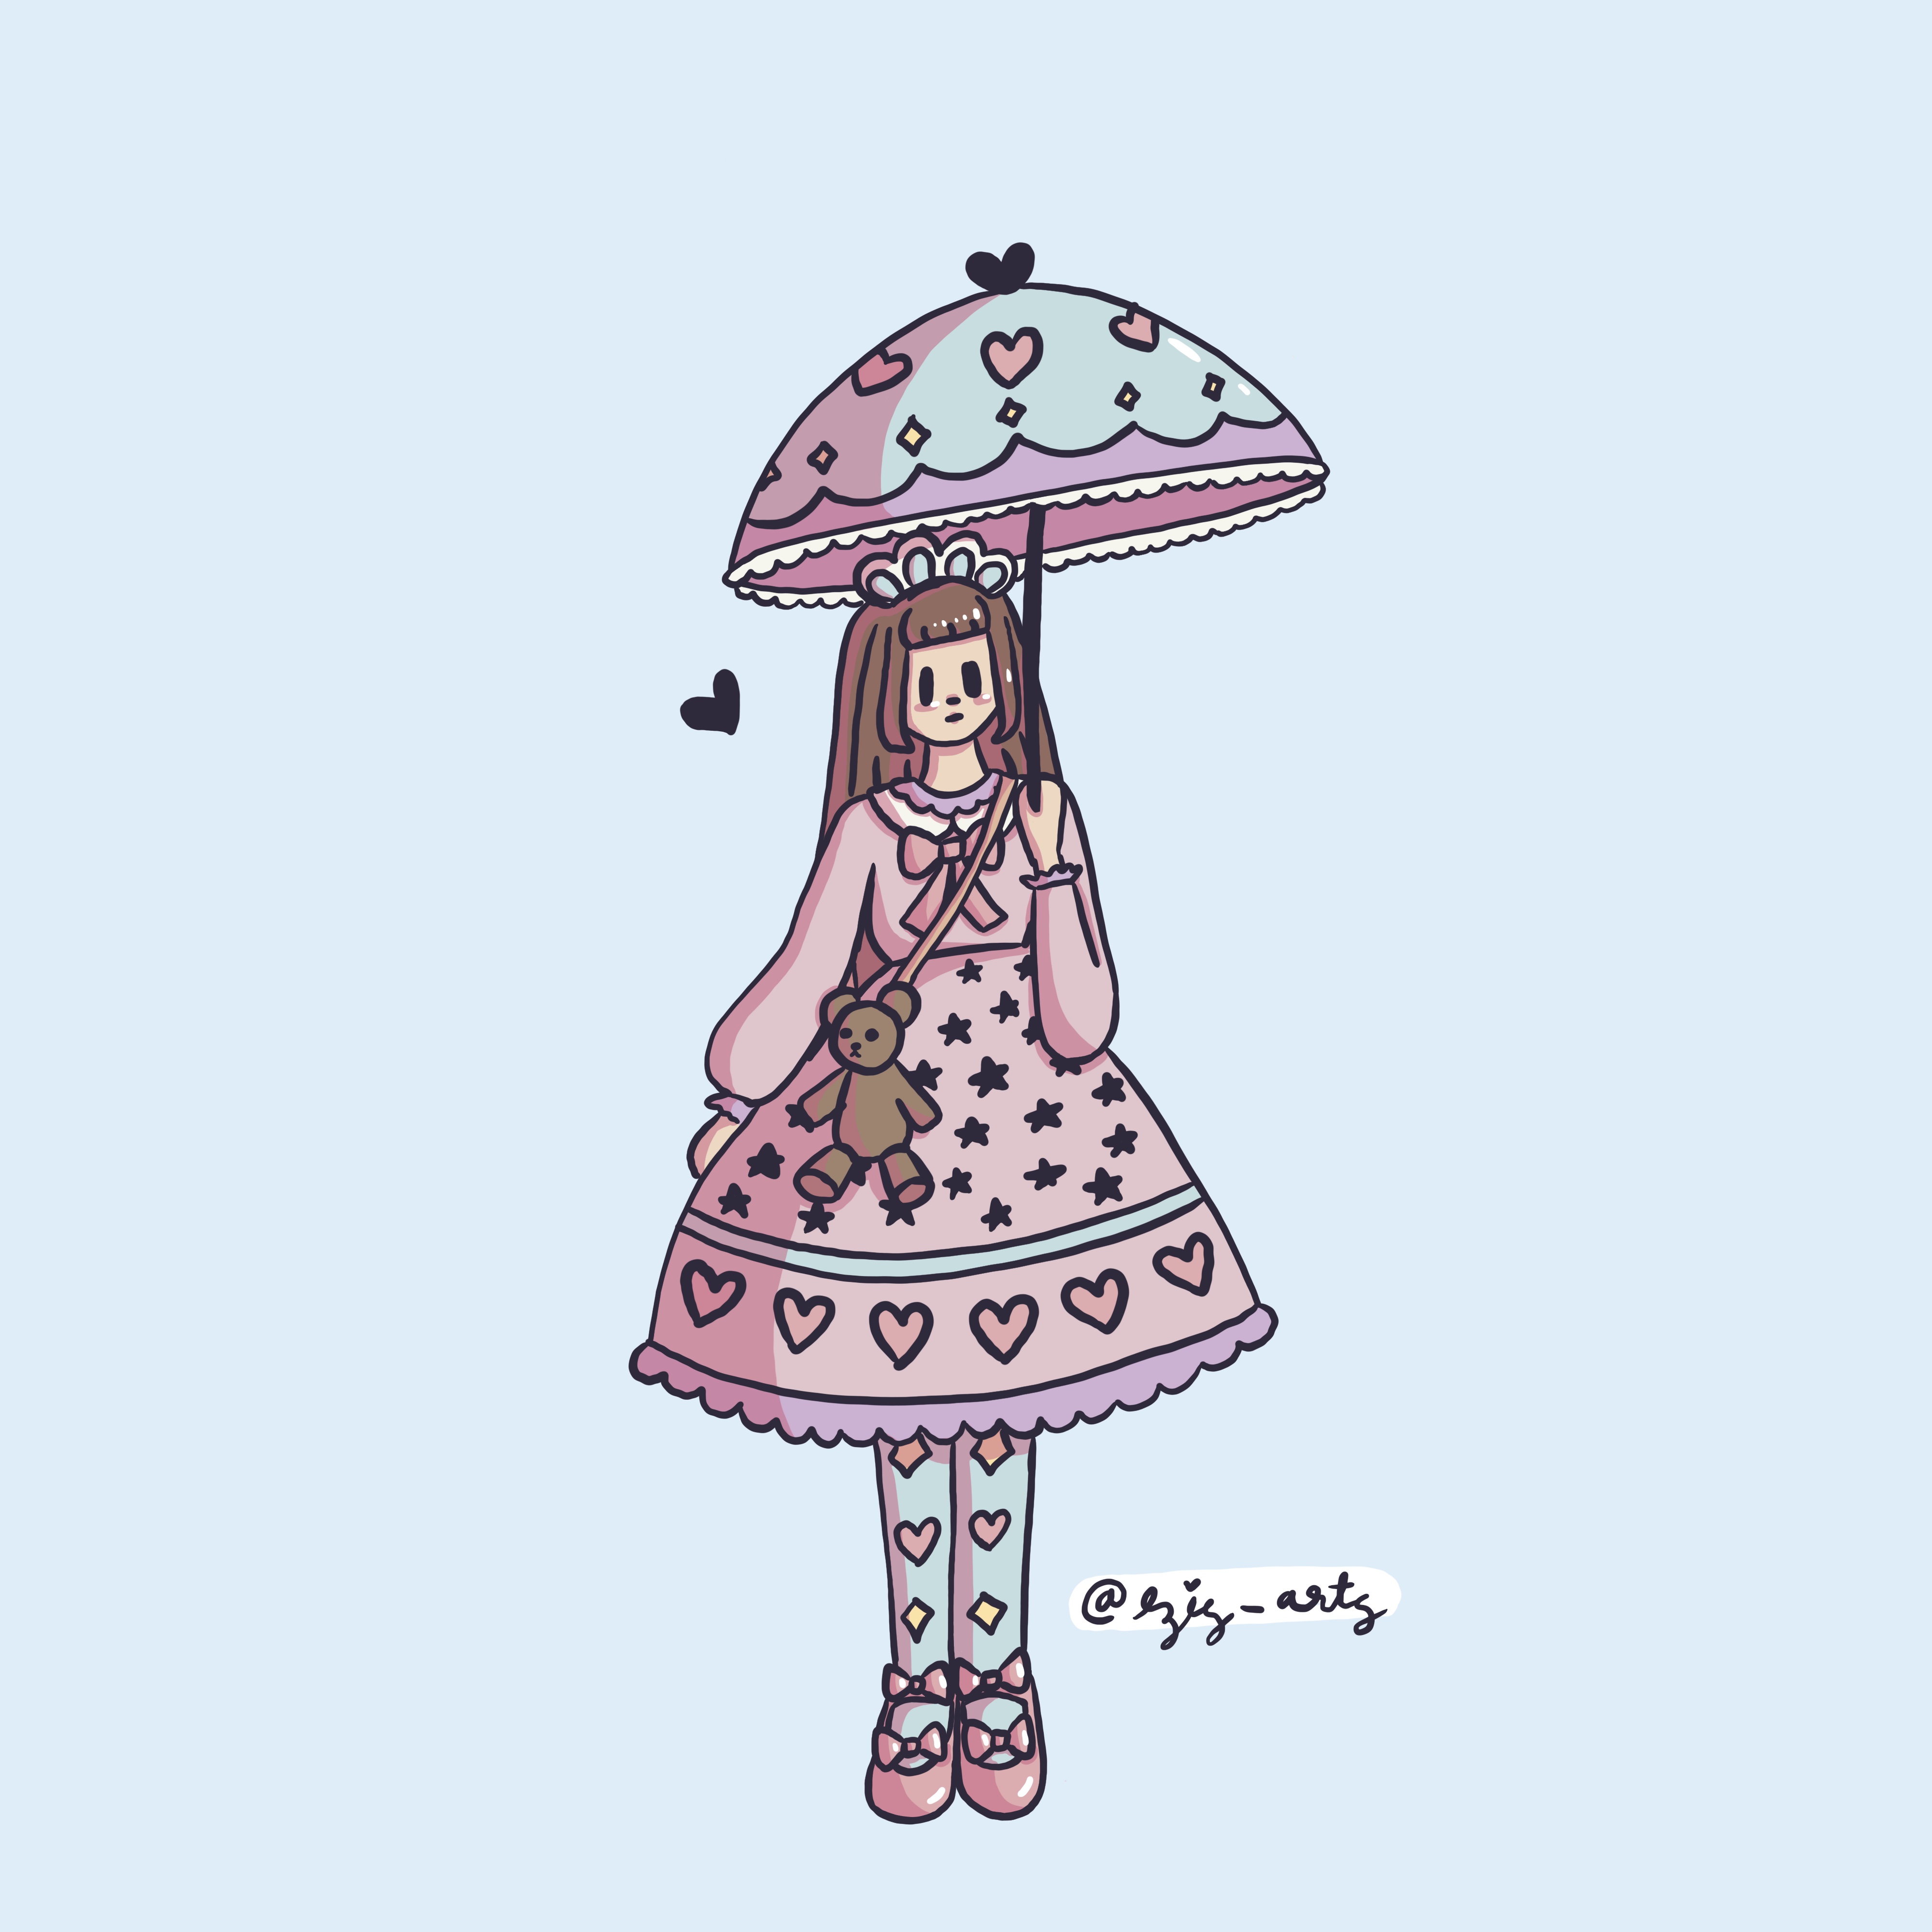 digital art of girl in pink purple and sax lolita fashion with a parasol in front of a light blue background